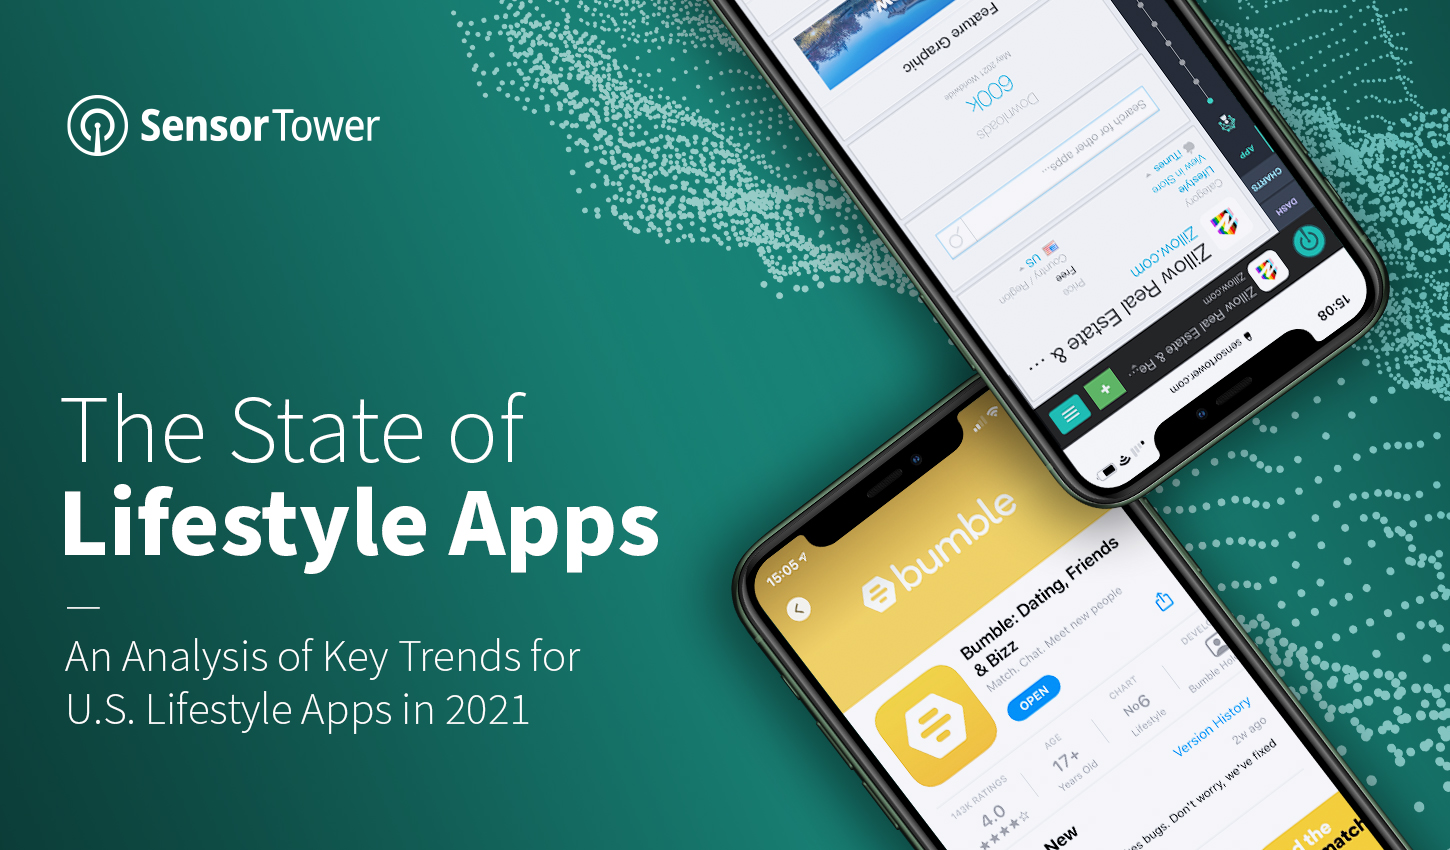 Four takeaways from Sensor Tower's 2021 State of Lifestyle Apps report.